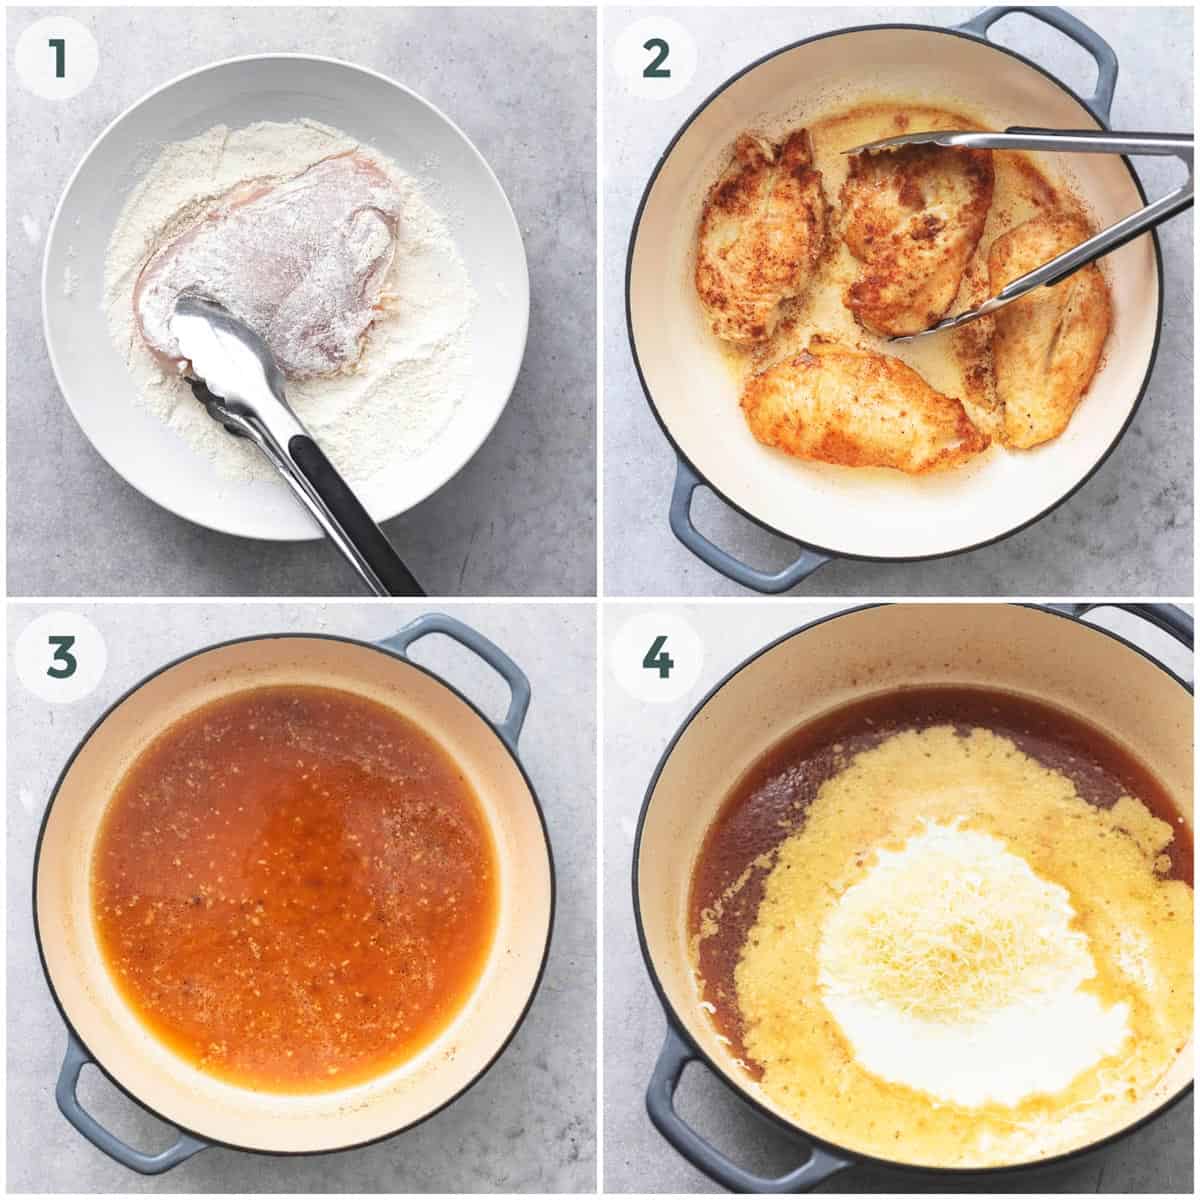 four steps for breading and cooking chicken with sauce in skillet